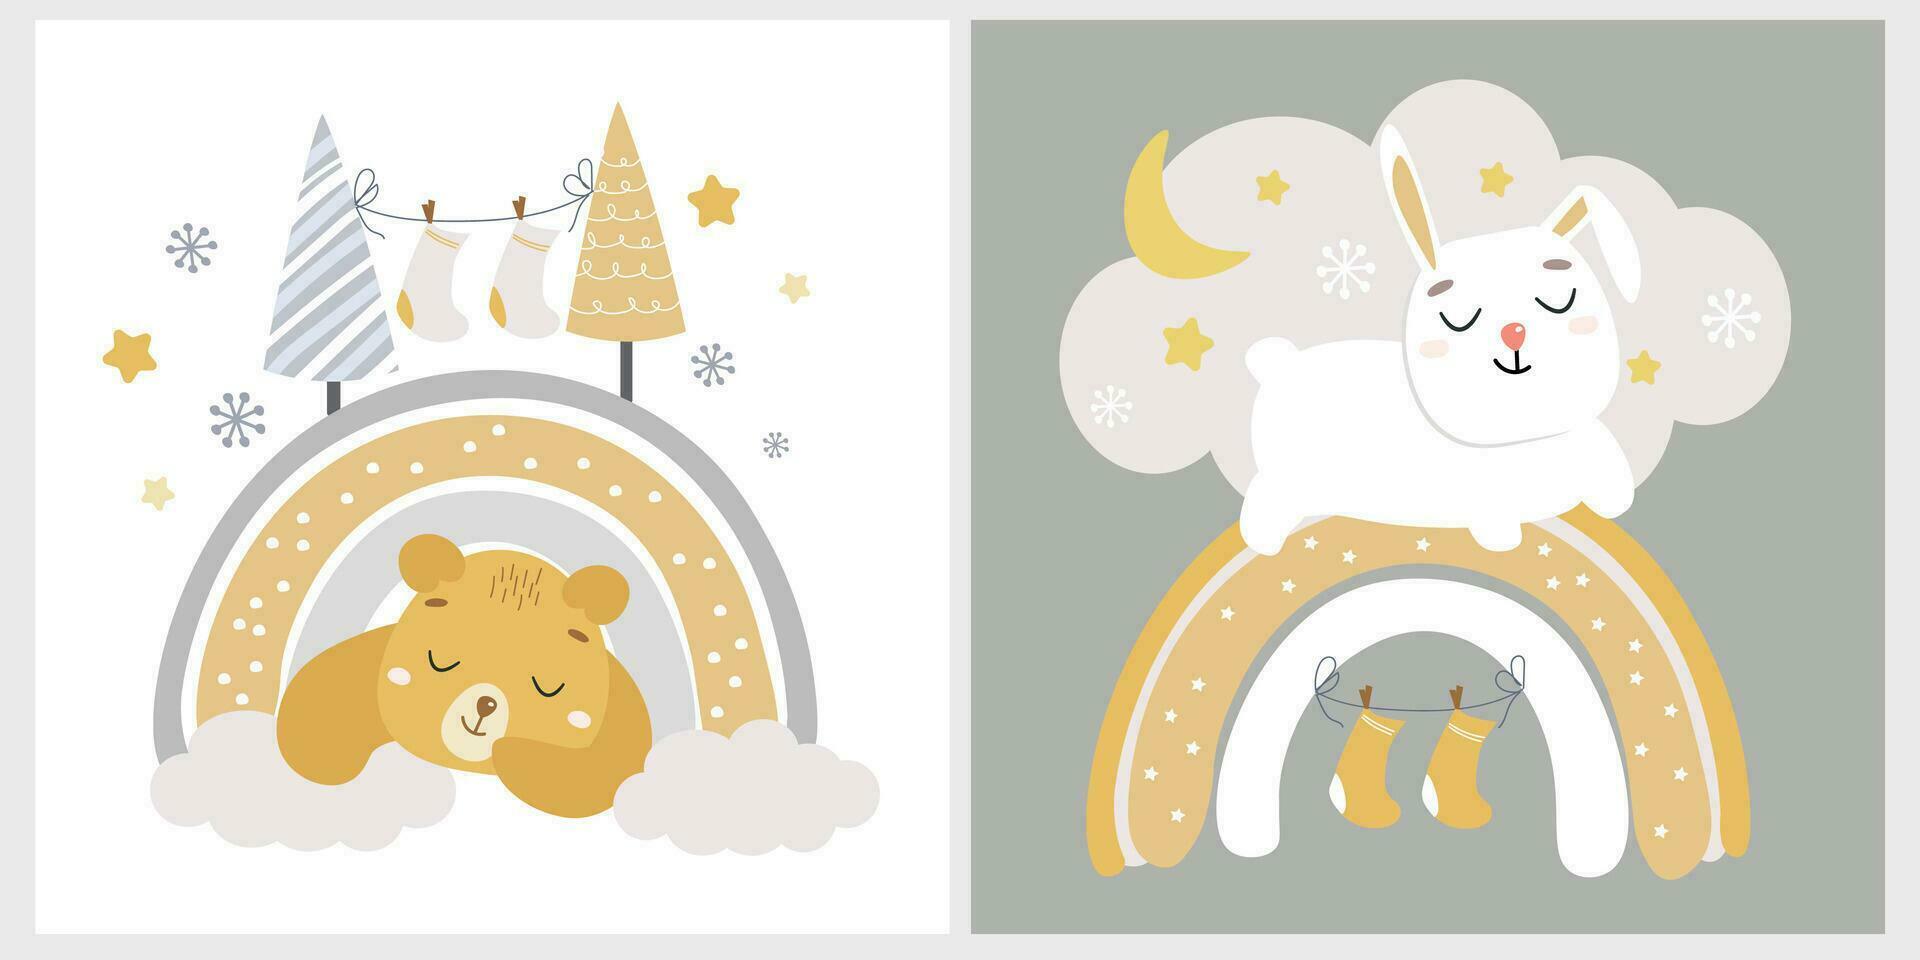 Baby funny cute animal print. A bear sleeps in a winter den made of a rainbow. The rabbit dreams of holiday gifts under a starry sky with snowflakes. Vector graphics.